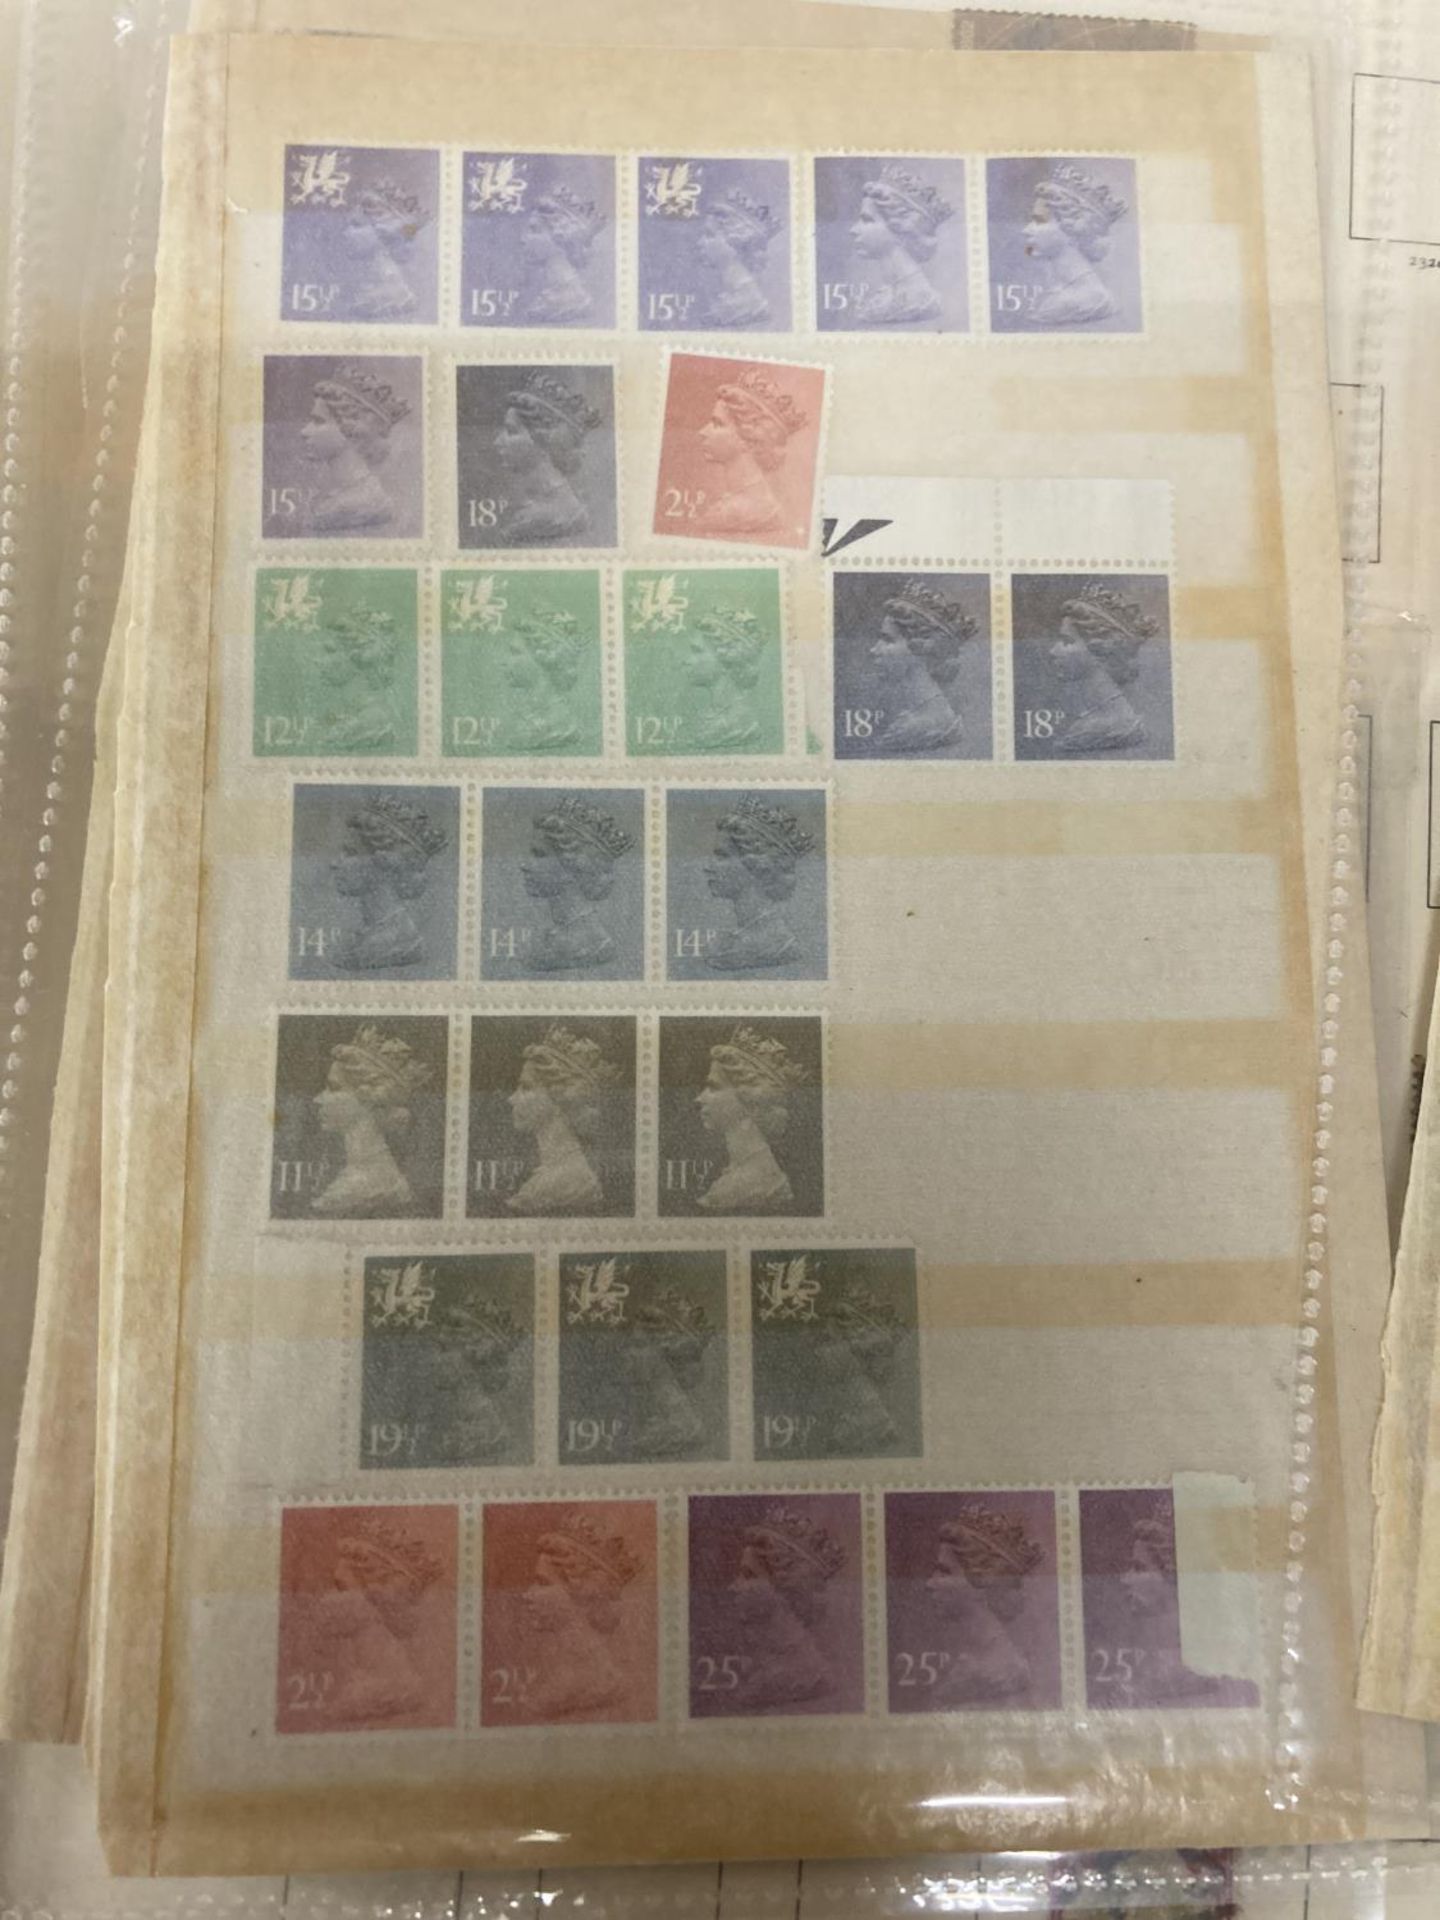 A GREAT BRITAIN STAMP ESTATE COLLECTION, THREE OLD ALBUMS TO INCLUDE STANLEY GIBBONS ALBUM WITH FINE - Image 7 of 11